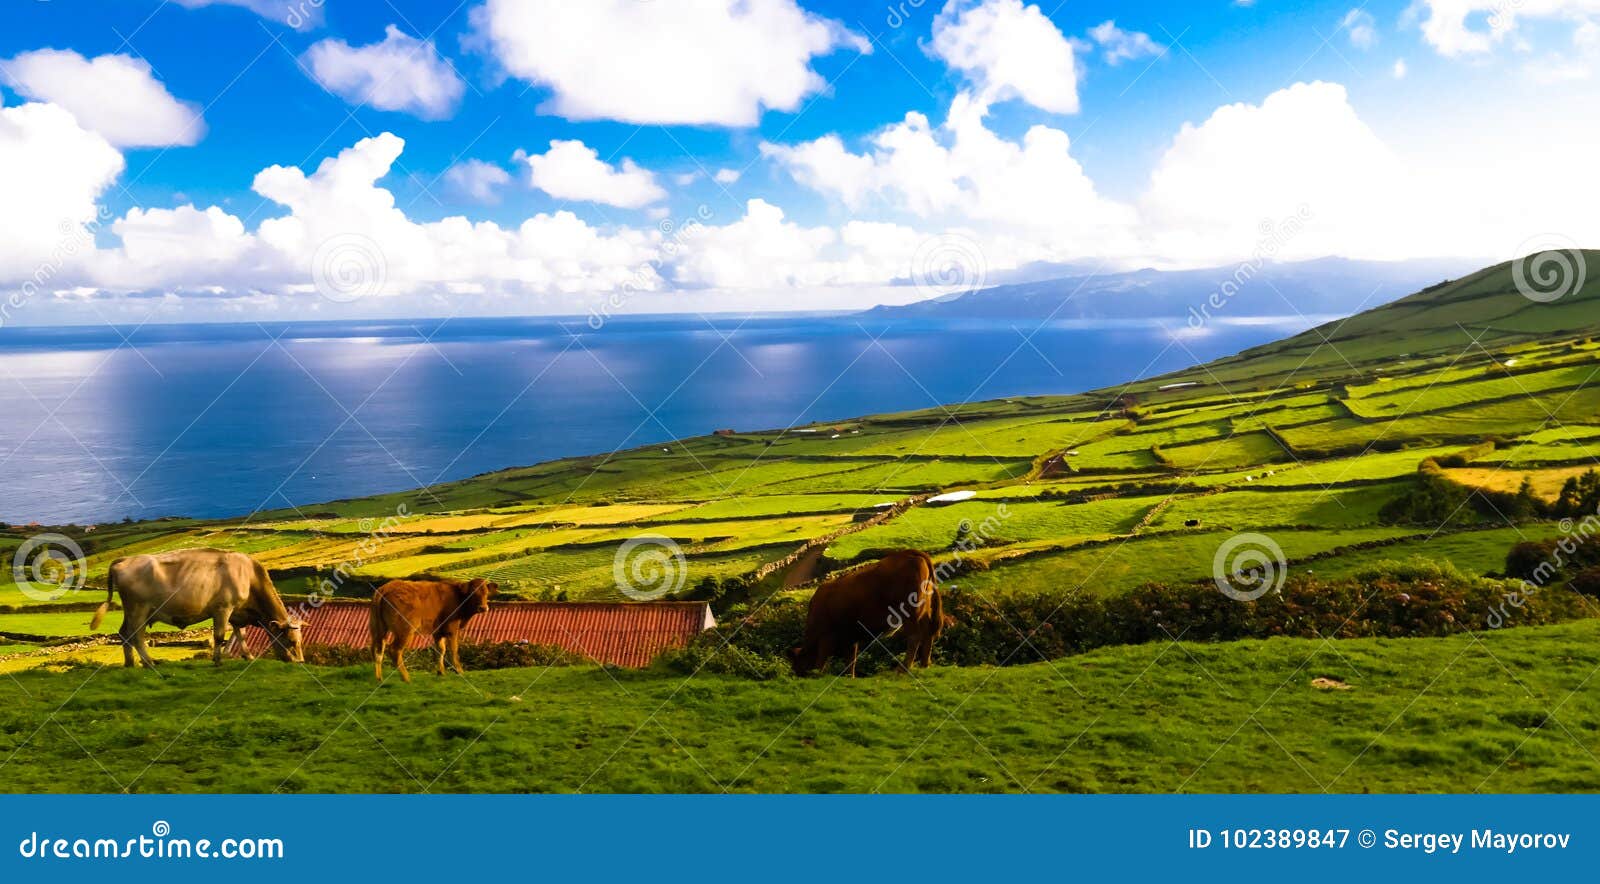 landscape with agriculture fields at corvo island, azores, portugal